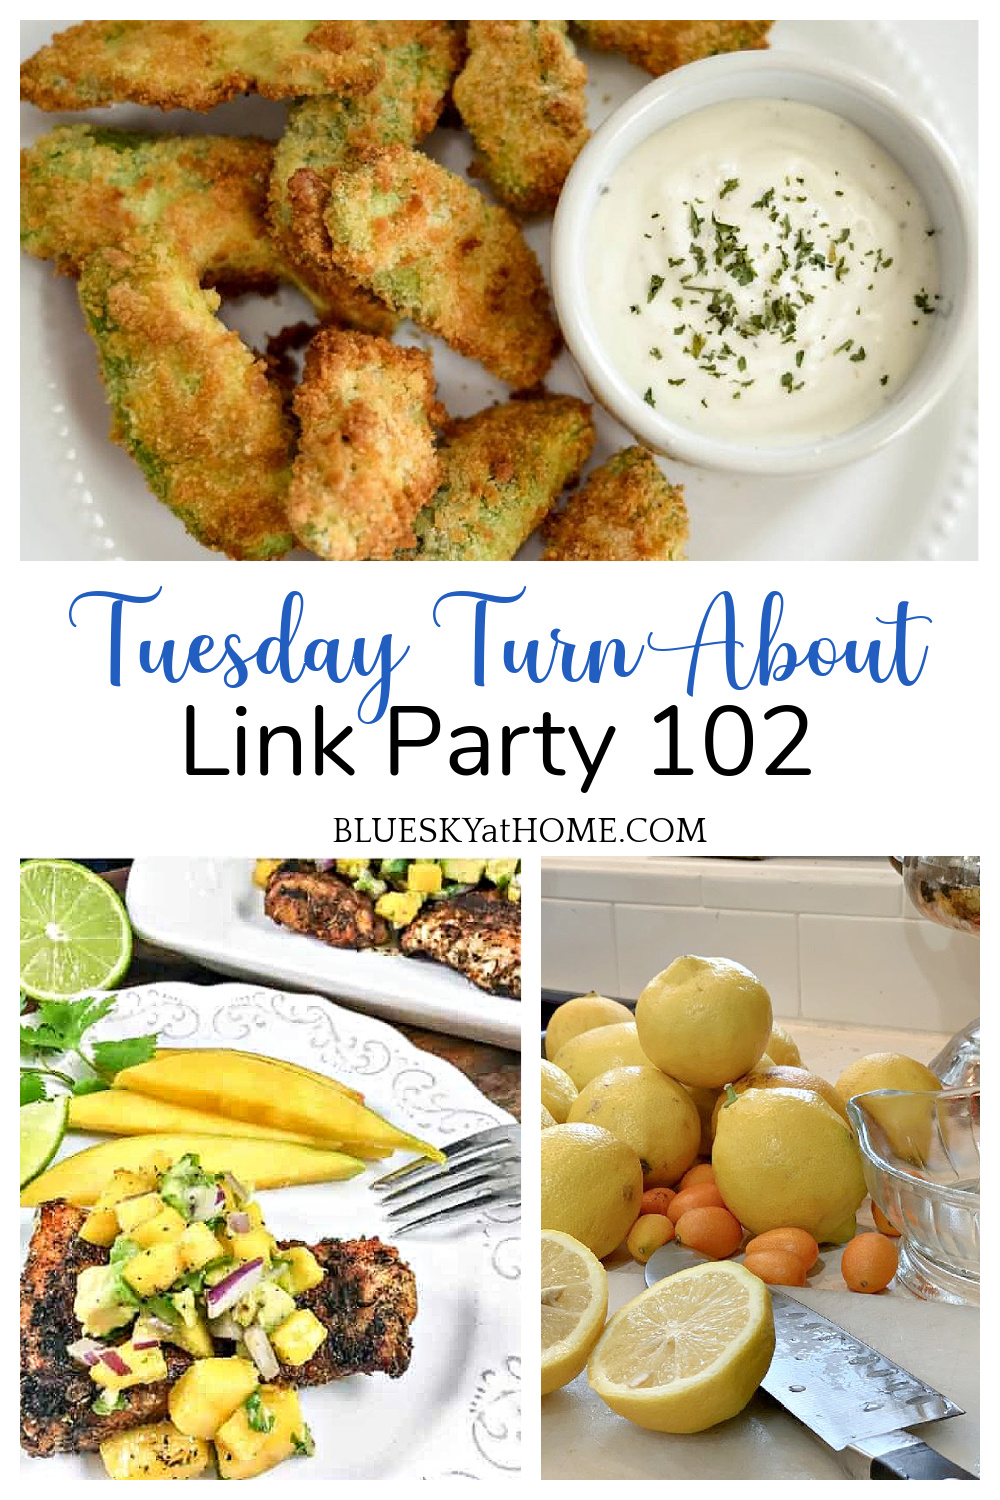 Tuesday Turn About Link Party 102